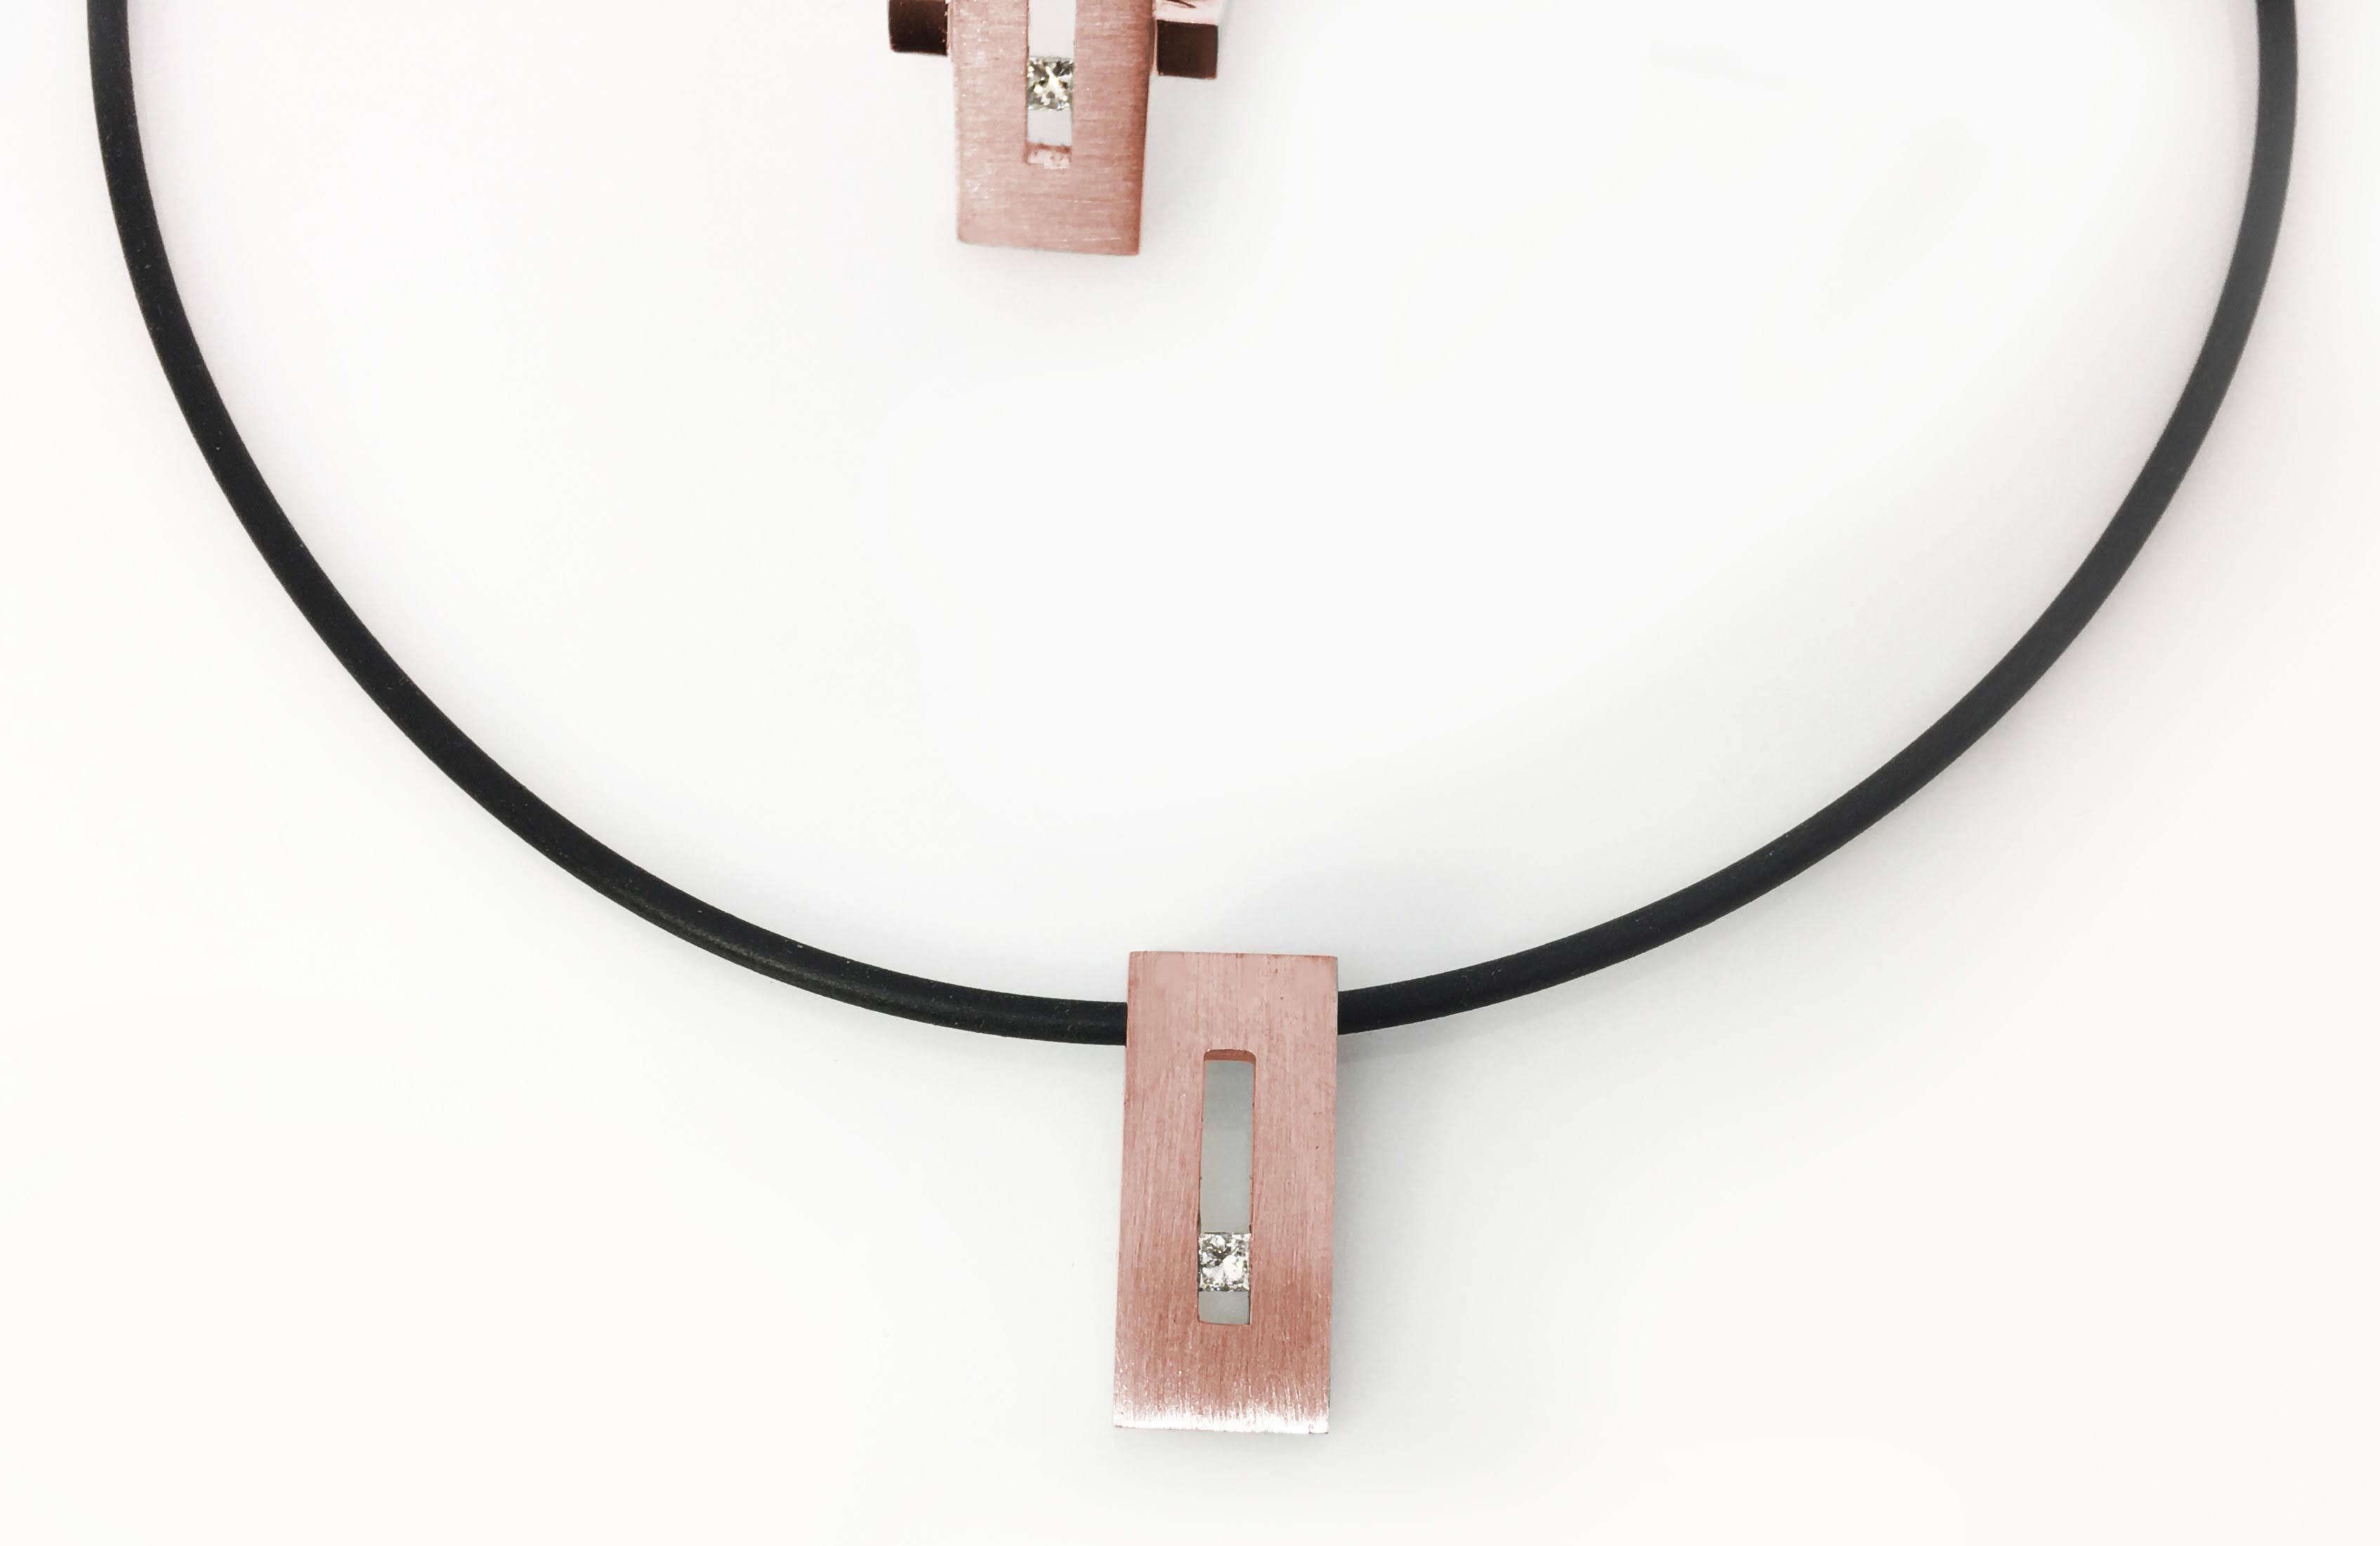 This Princess Diamond in Rose Gold Rectangle Pendant on Rubber Cord is part of our Suspension Collection. Modern and architecturally inspired, this rectangle pendant is shown in rose gold with a brushed finish and set off center with an